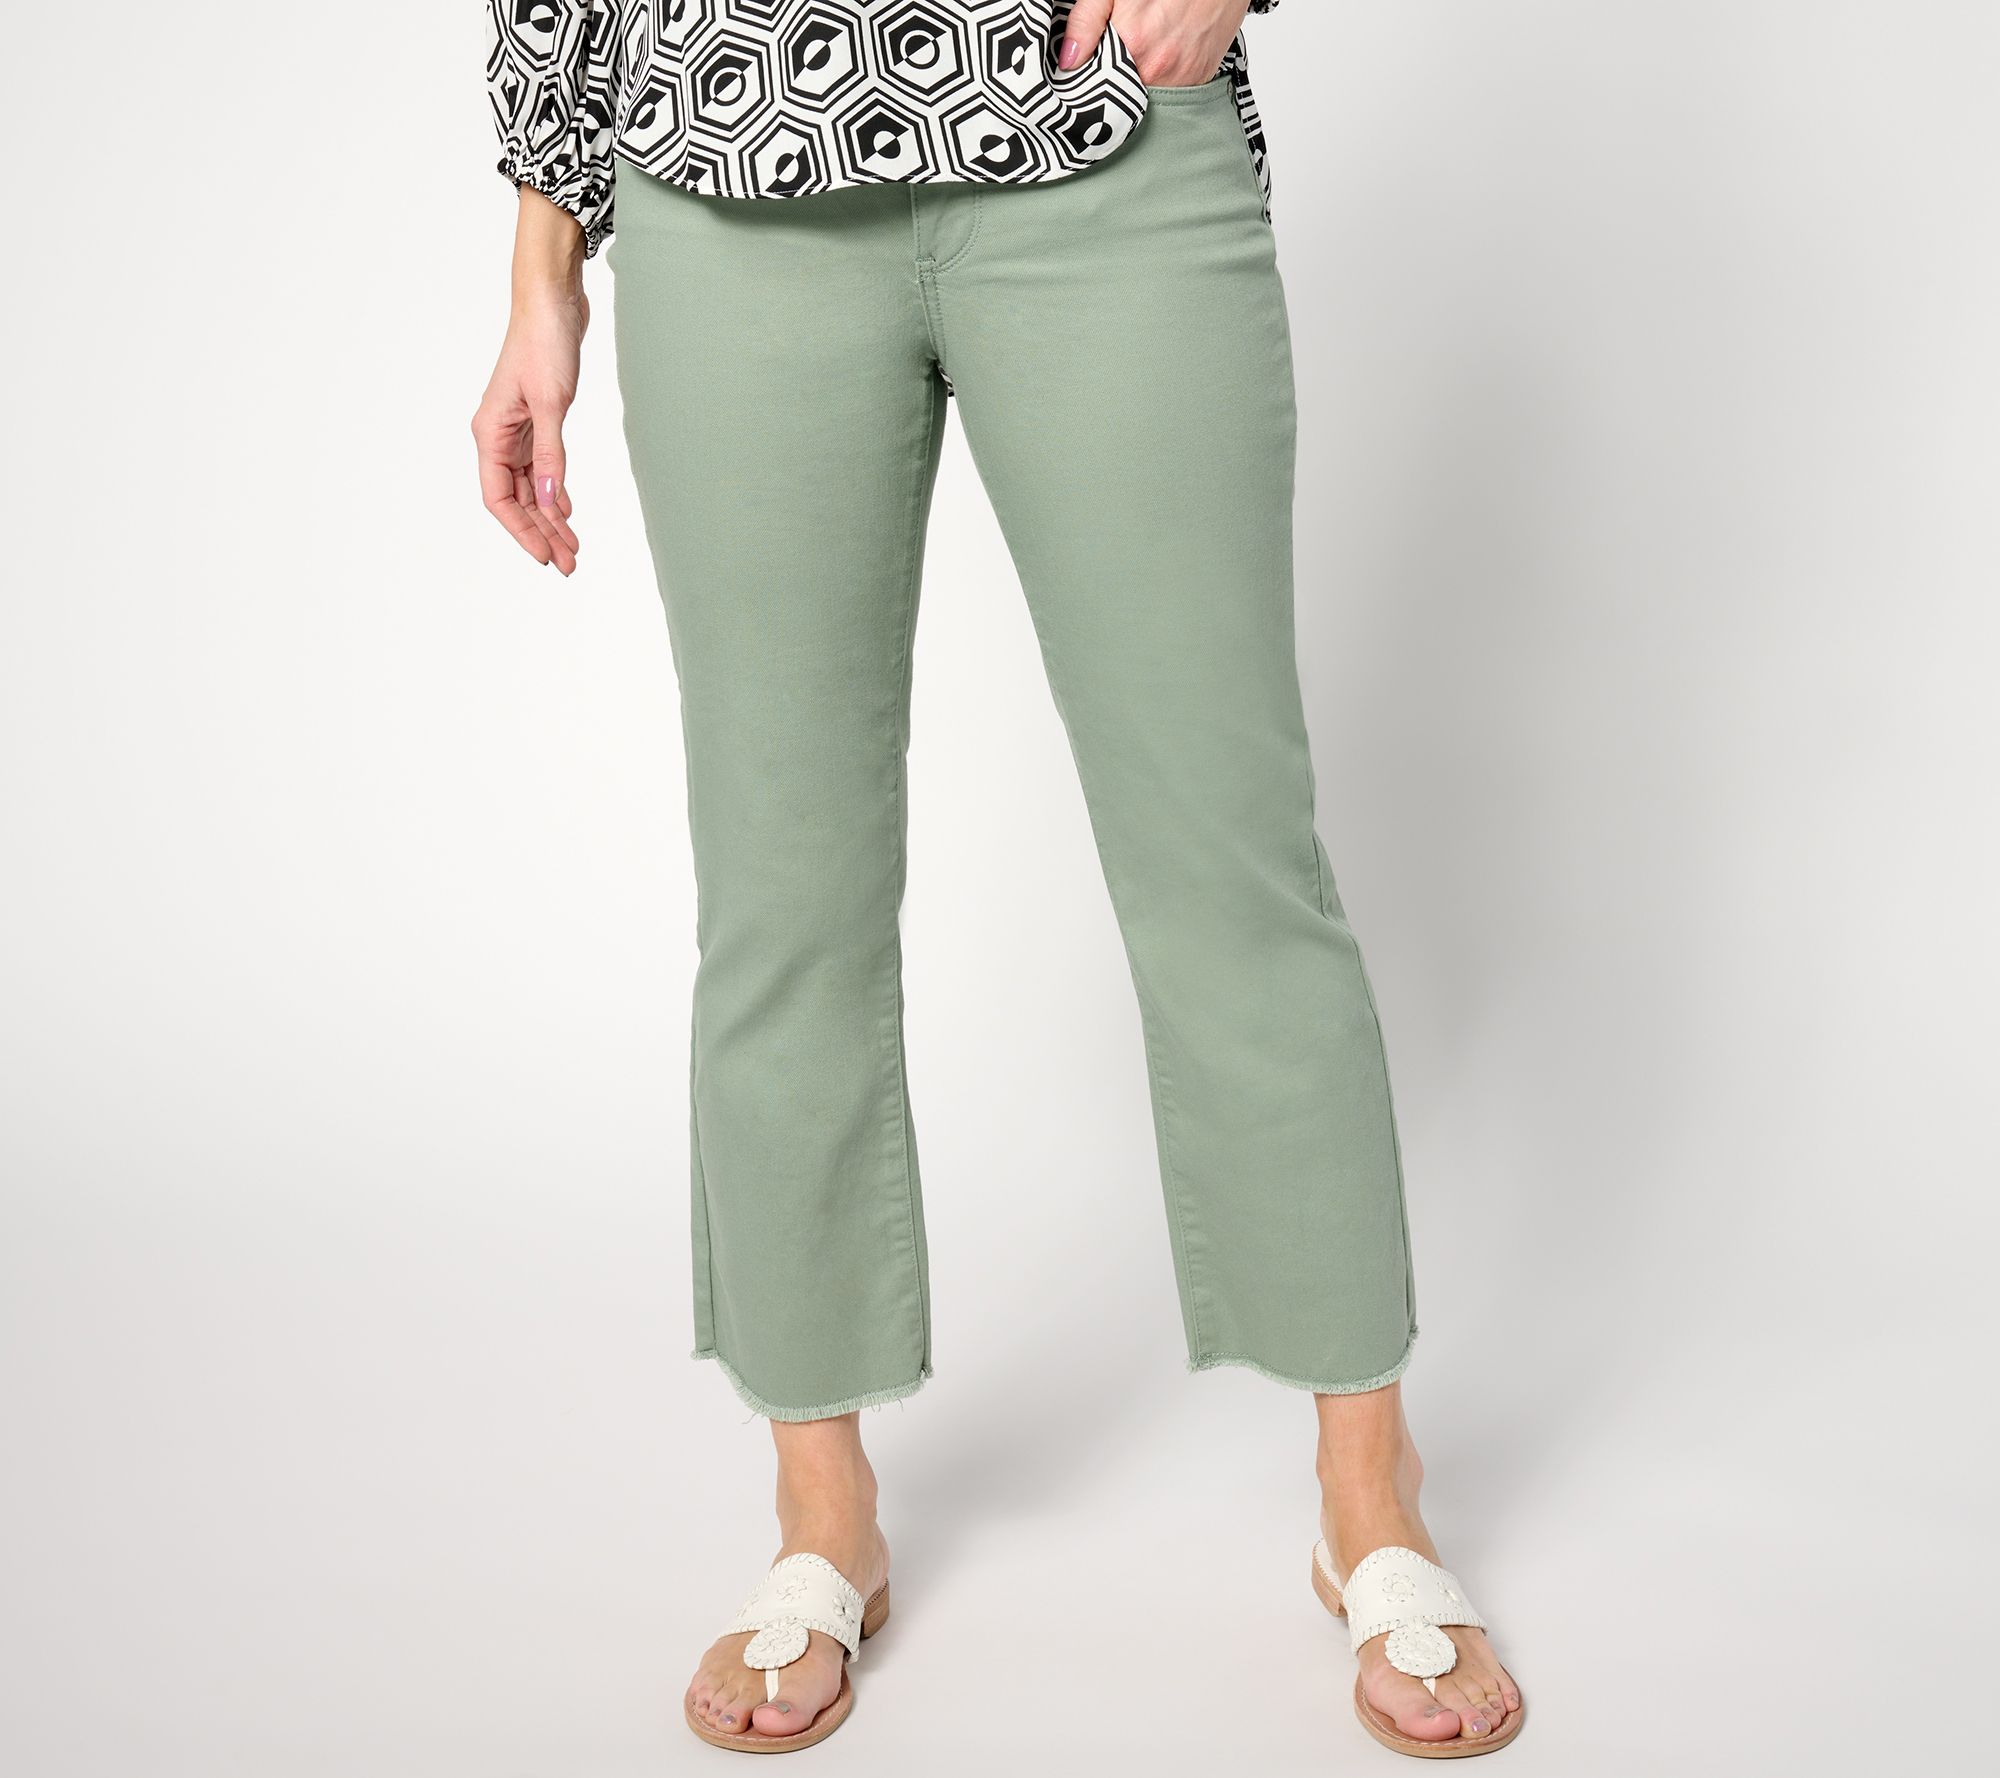 Chloe Capri Jeans With Side Slits - Feather Tan